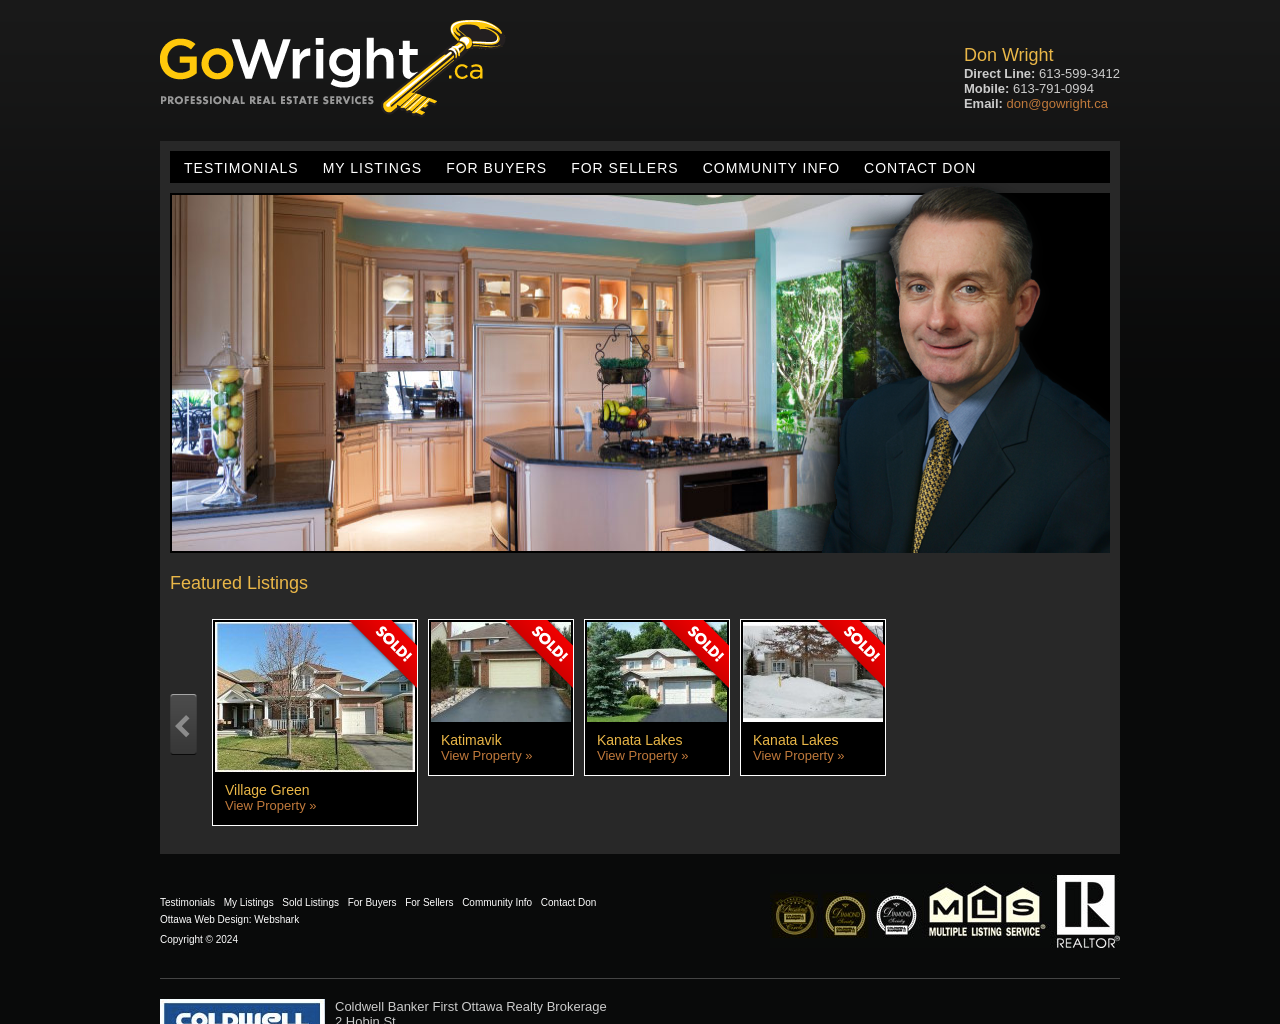 gowright.ca